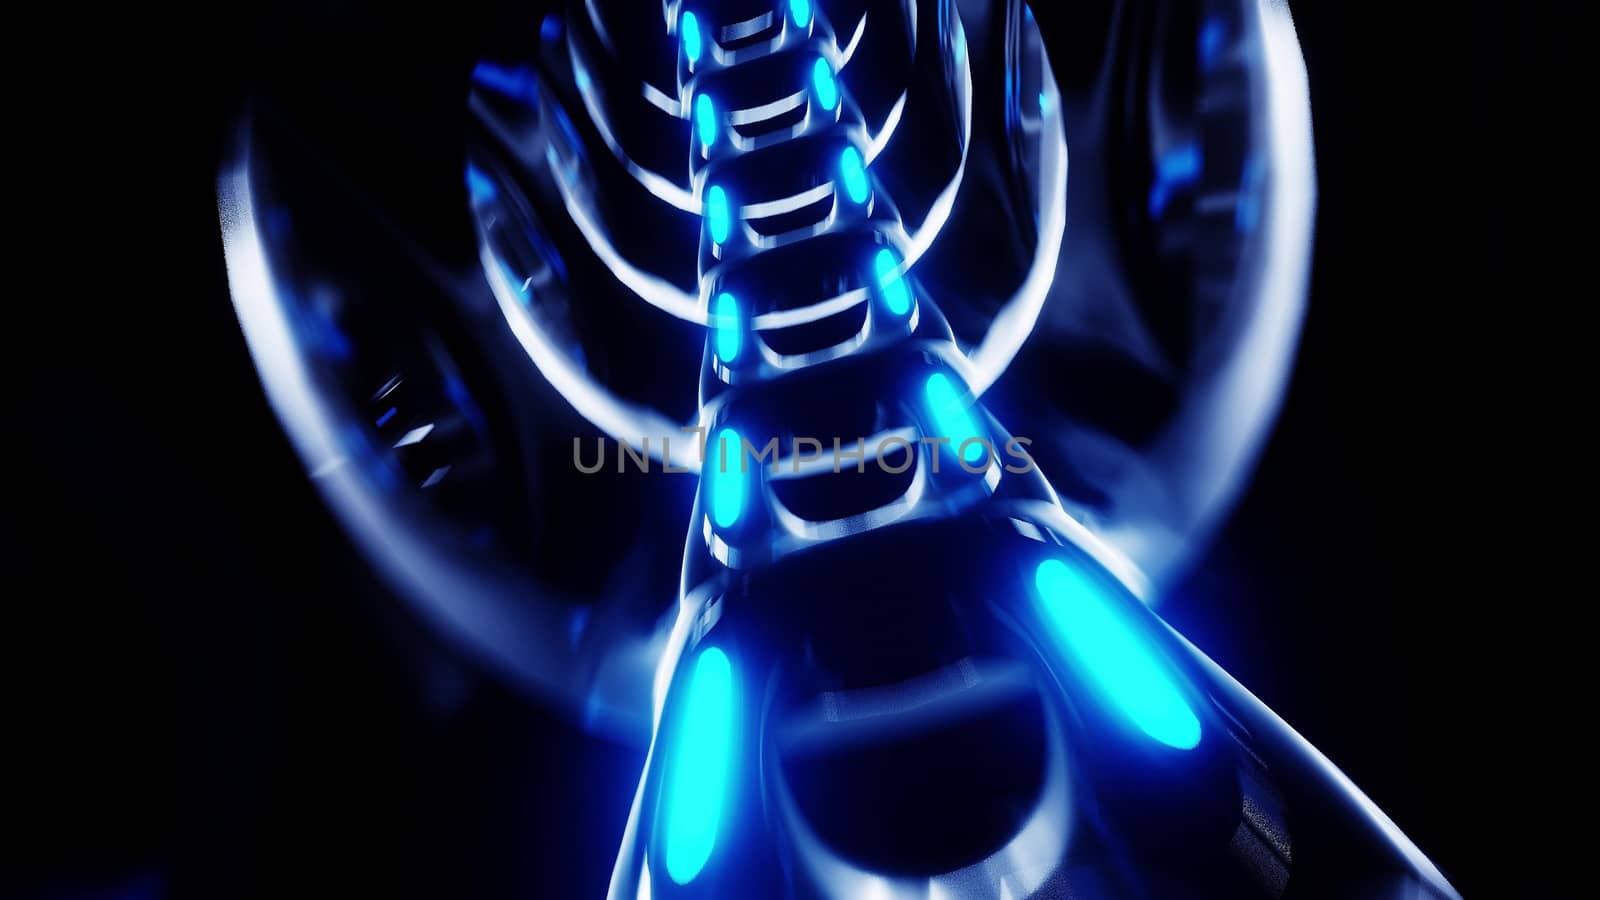 abstract futuristic sci-fi tunnel corridor 3d illustration background wallpaper , abstract 3d rendering design